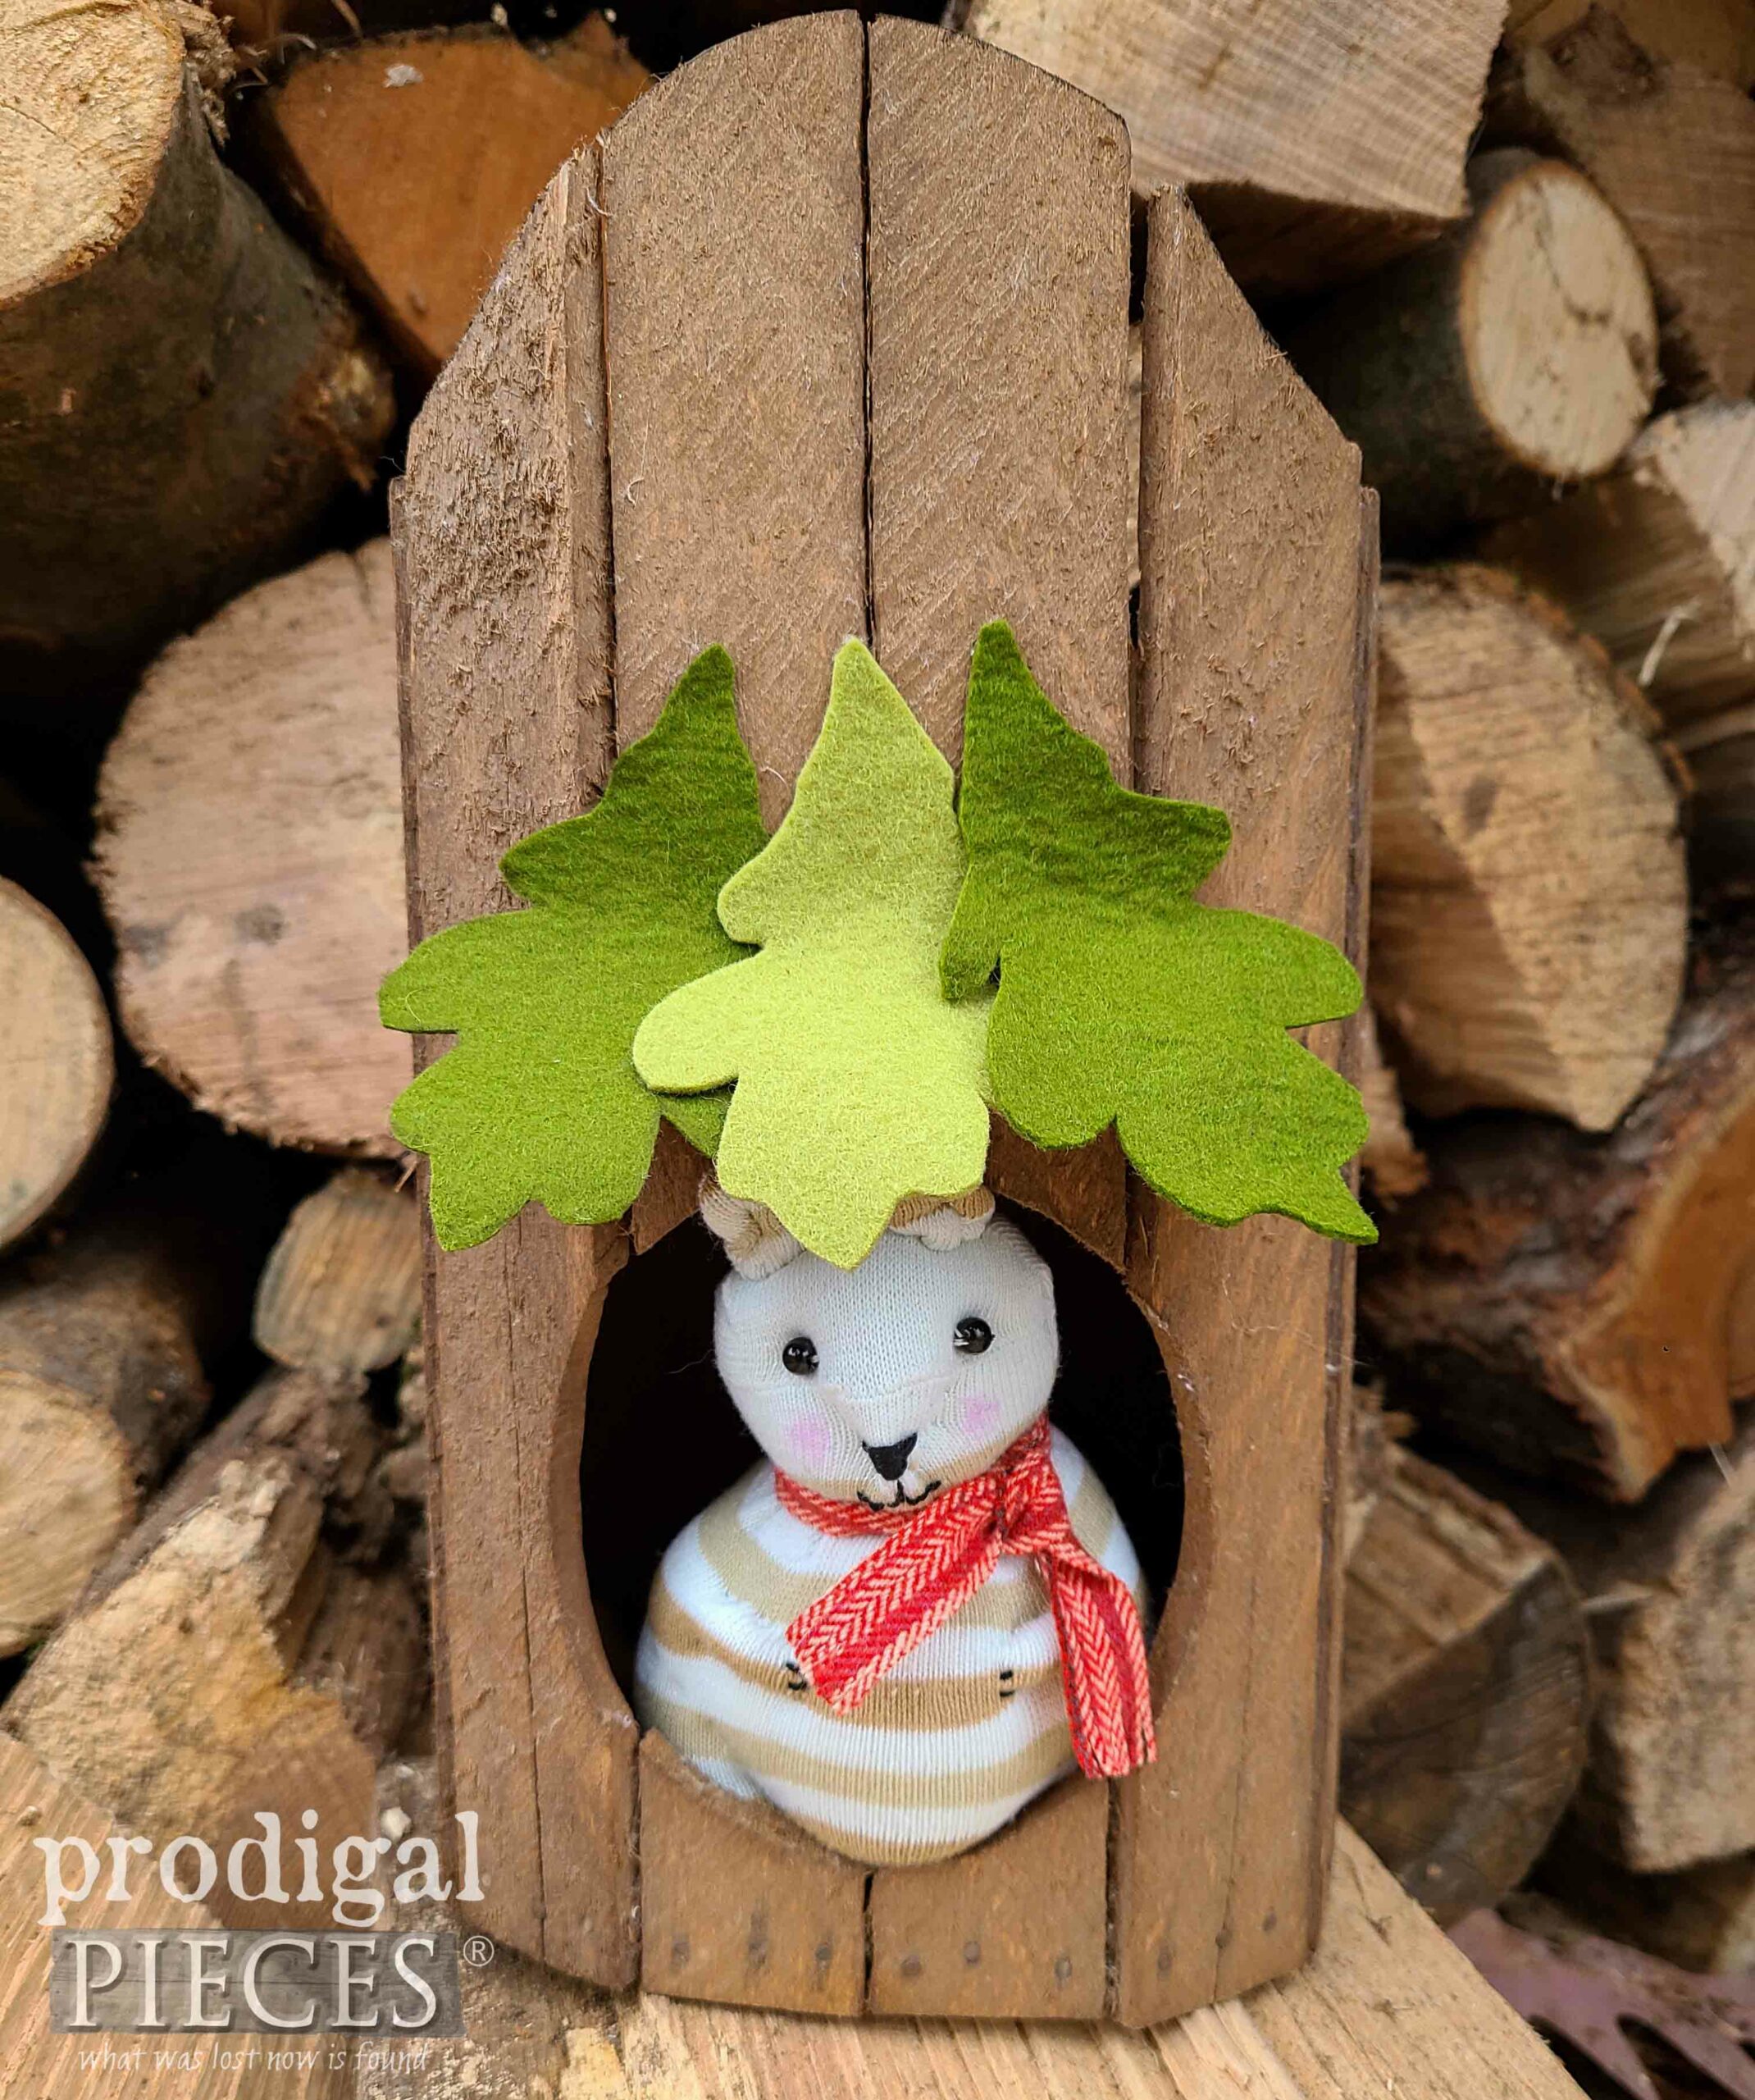 Handmade Squirrel Treehouse Playset Created from Socks and a Thrifted Planter by Larissa of Prodigal Pieces | prodigalpieces.com #prodigalpieces #upcycled #toys #crafts